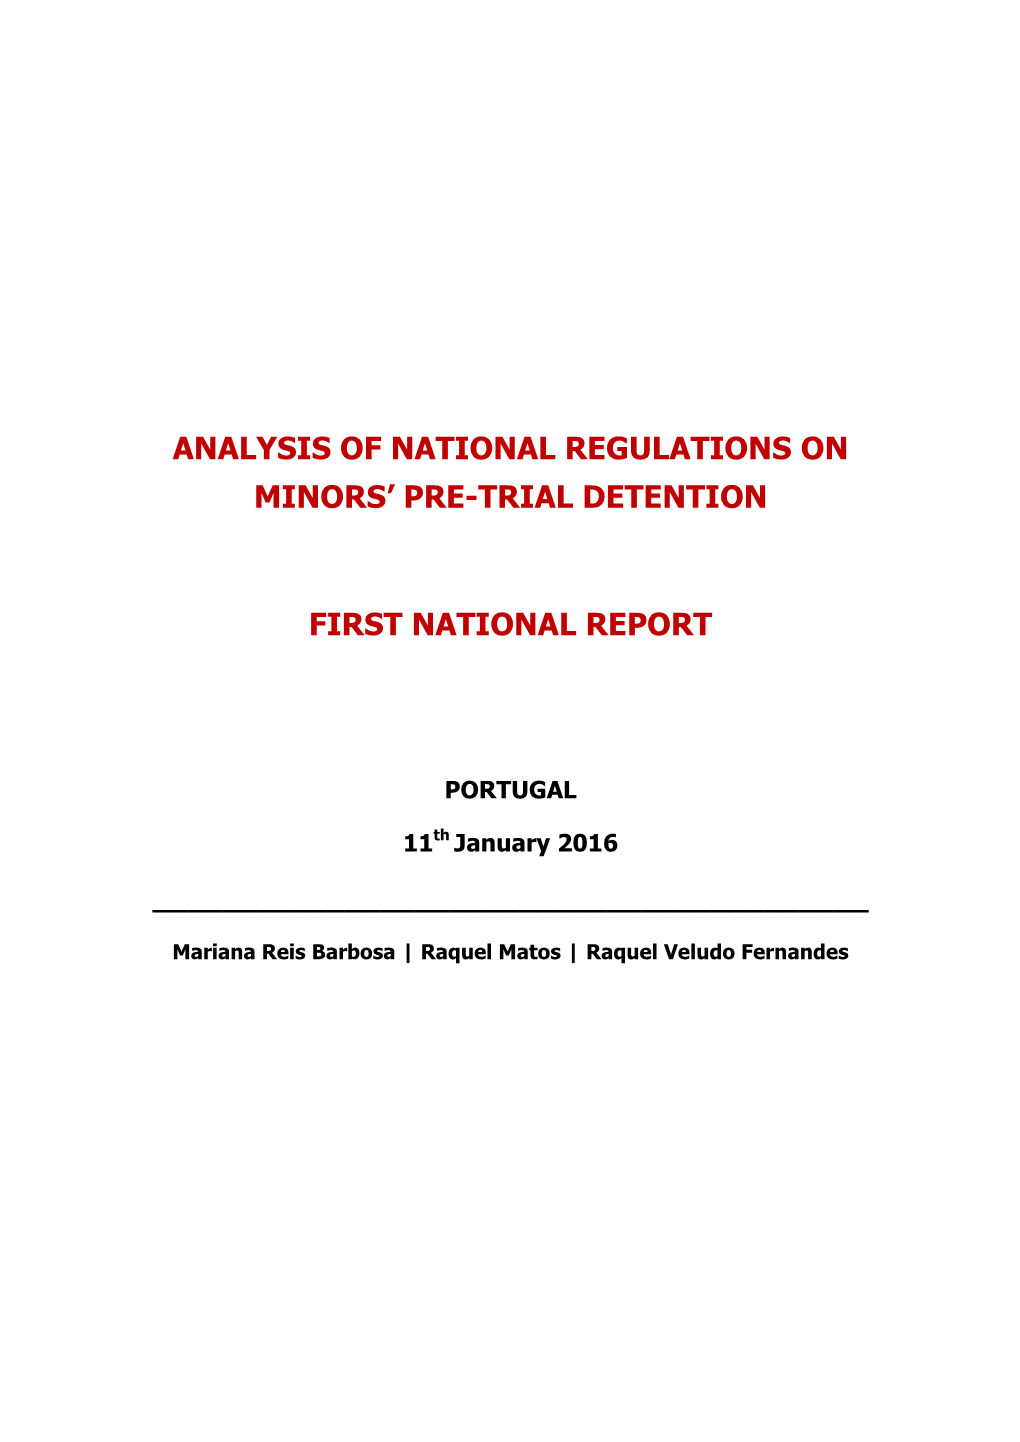 Analysis of National Regulations on Minors' Pre